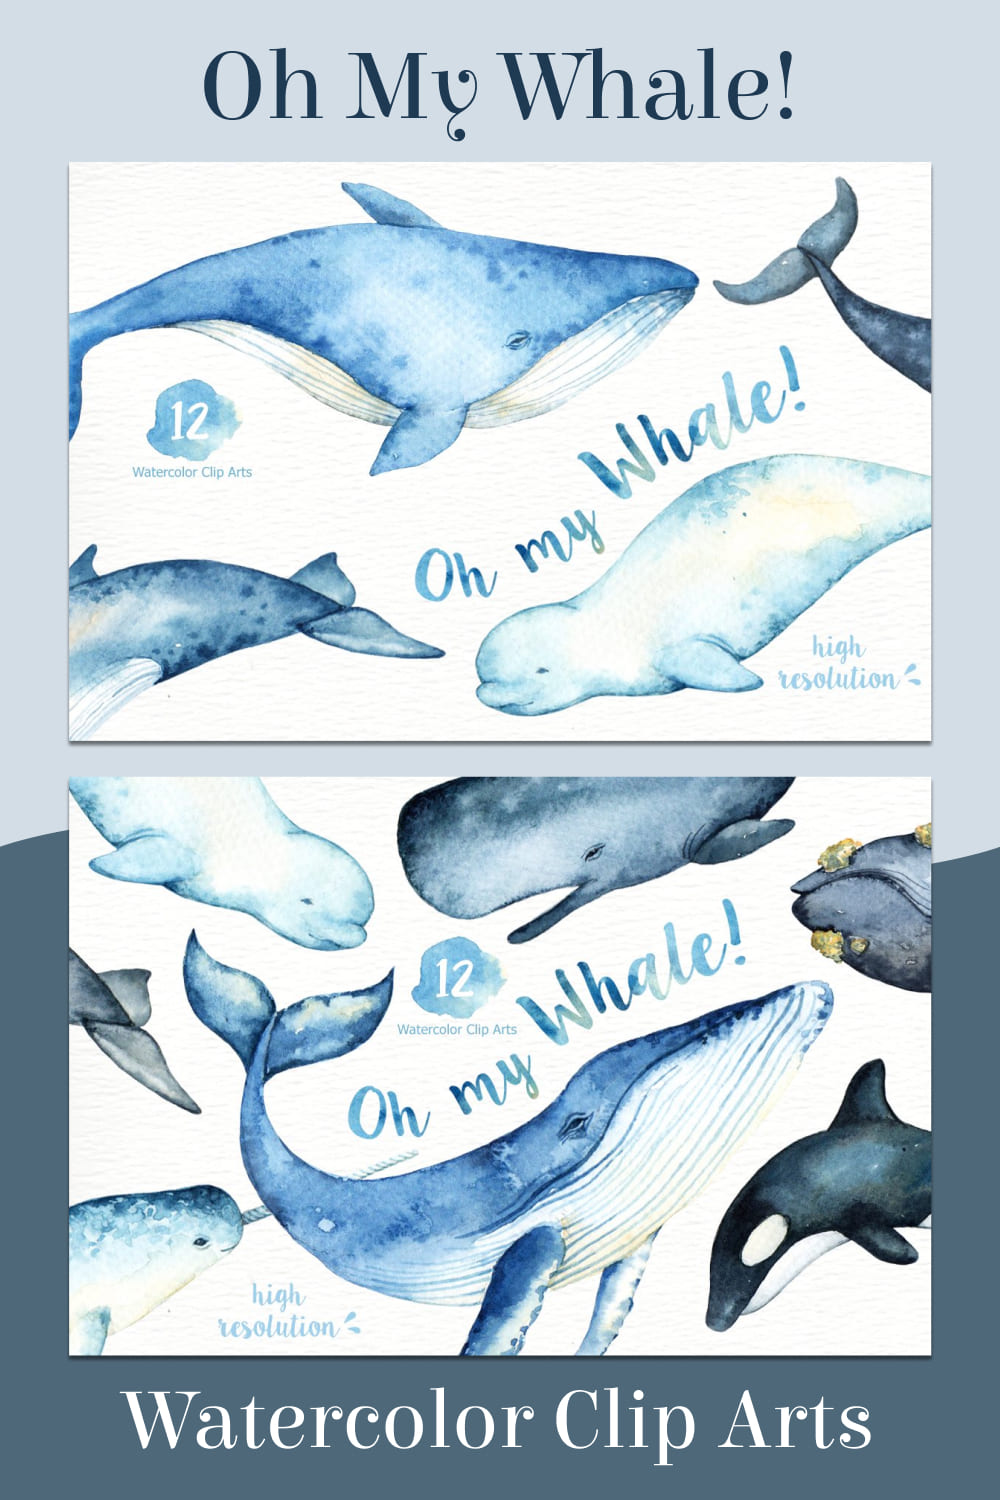 oh my whale watercolor clip arts set.